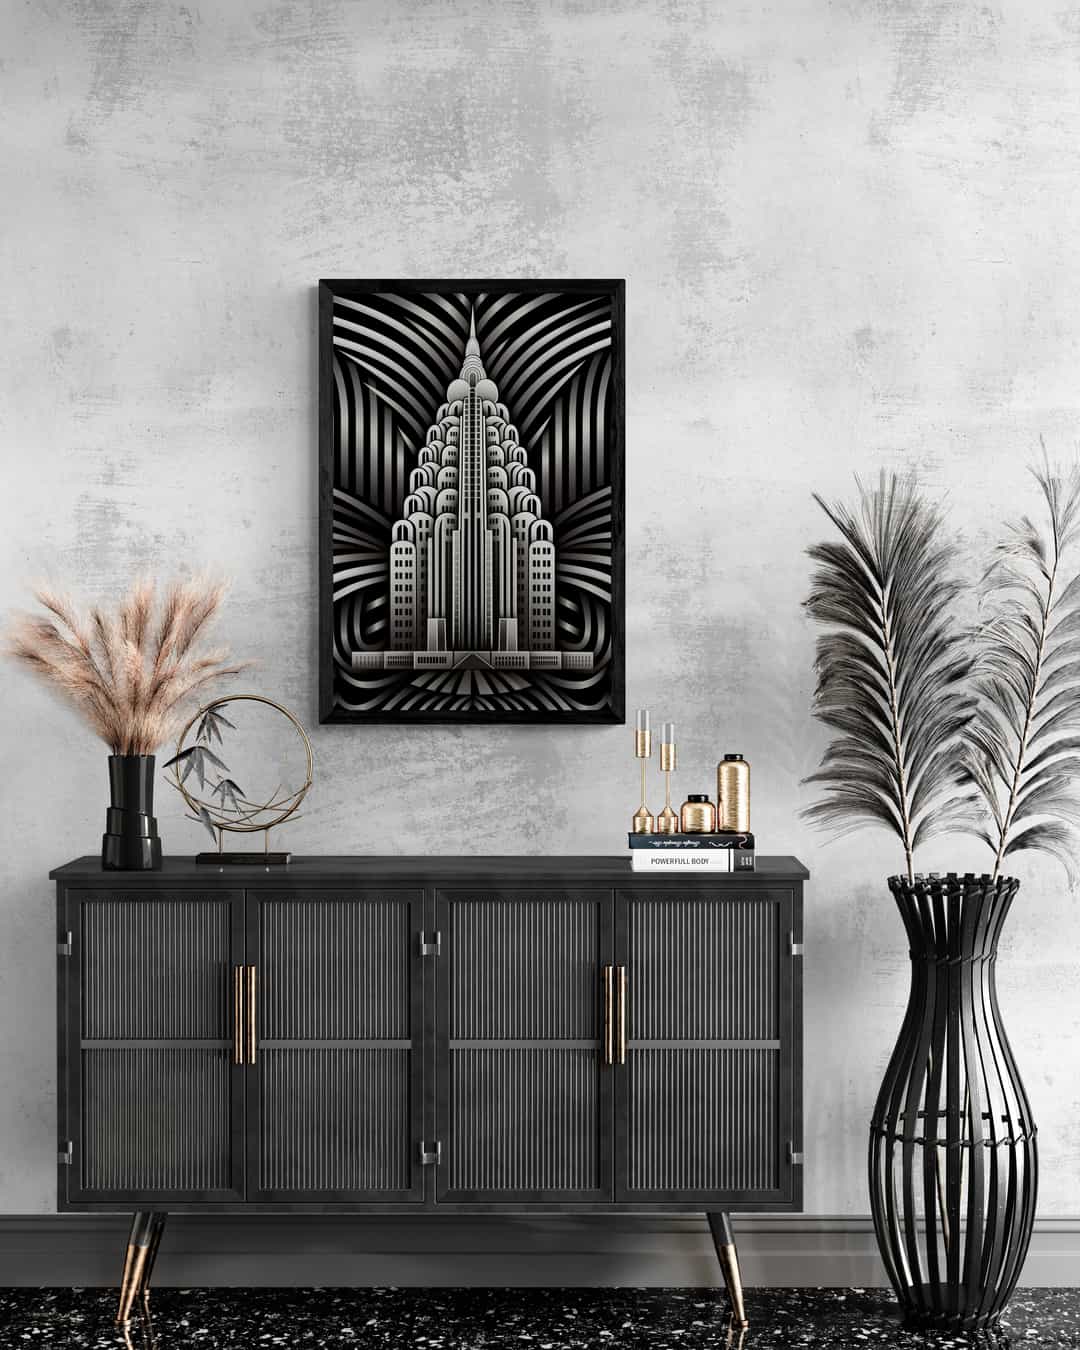 Monochrome art deco artwork by Milton Wes Art, featuring an elegant, symmetrical skyscraper design, hanging above a contemporary sideboard with decorative vases and dried grass accents in a chic, textured room.